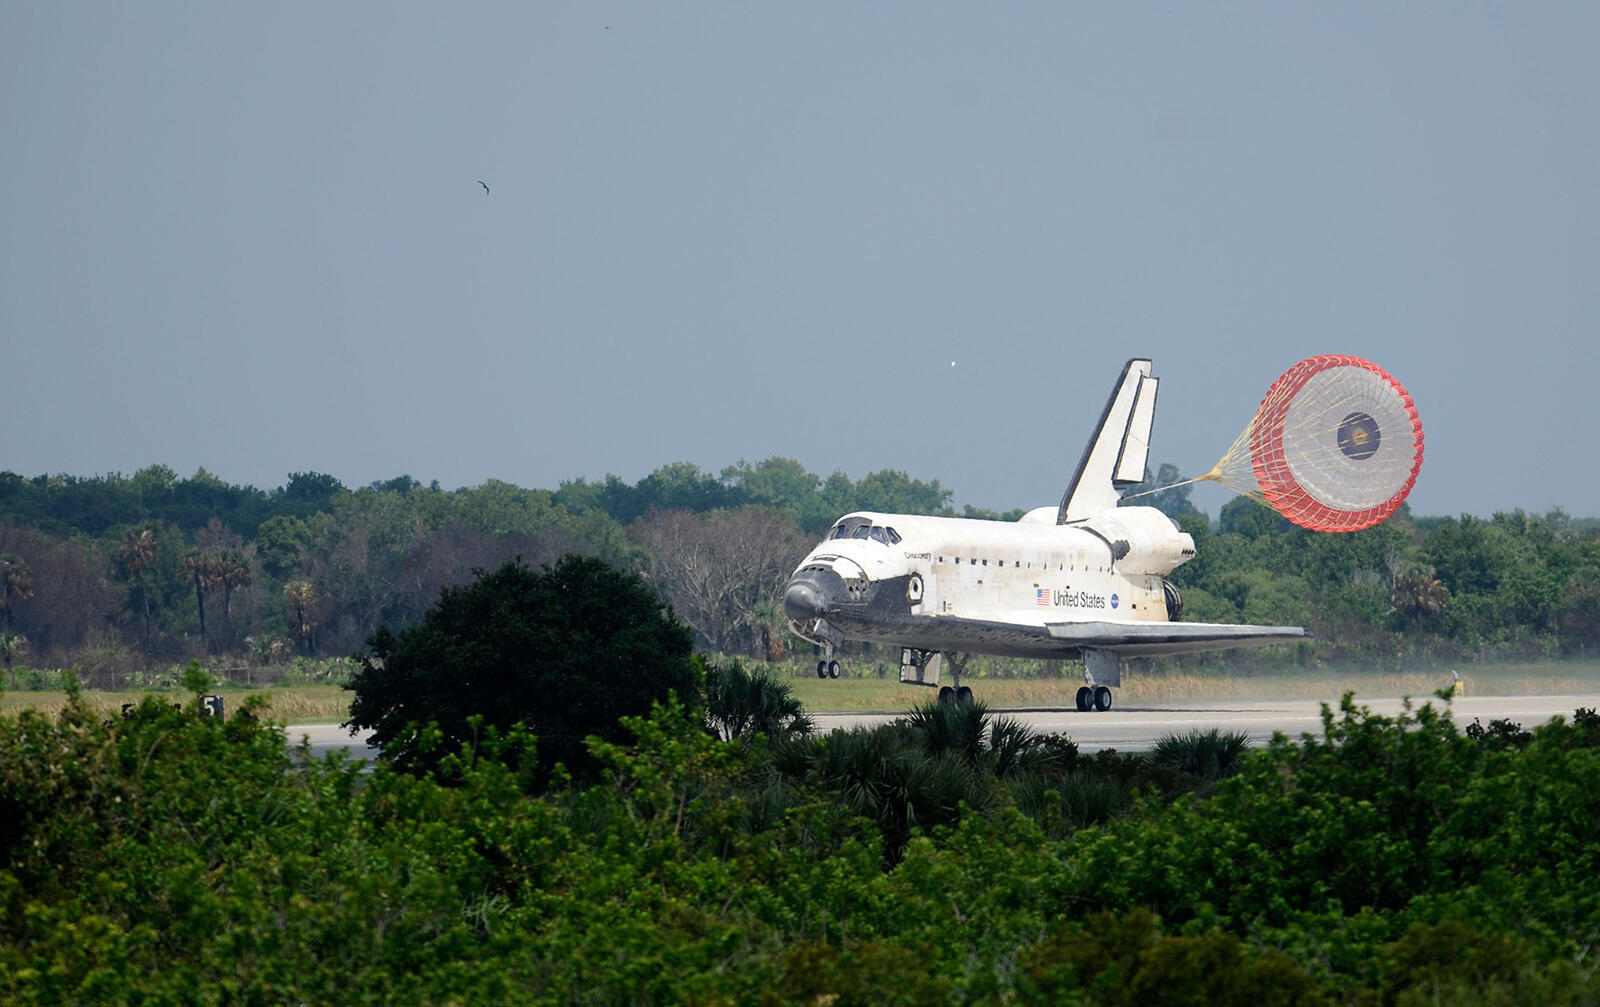 Space Shuttle Discovery touches down on the Kennedy Space Center runway to carry HOSHIDE back to Earth